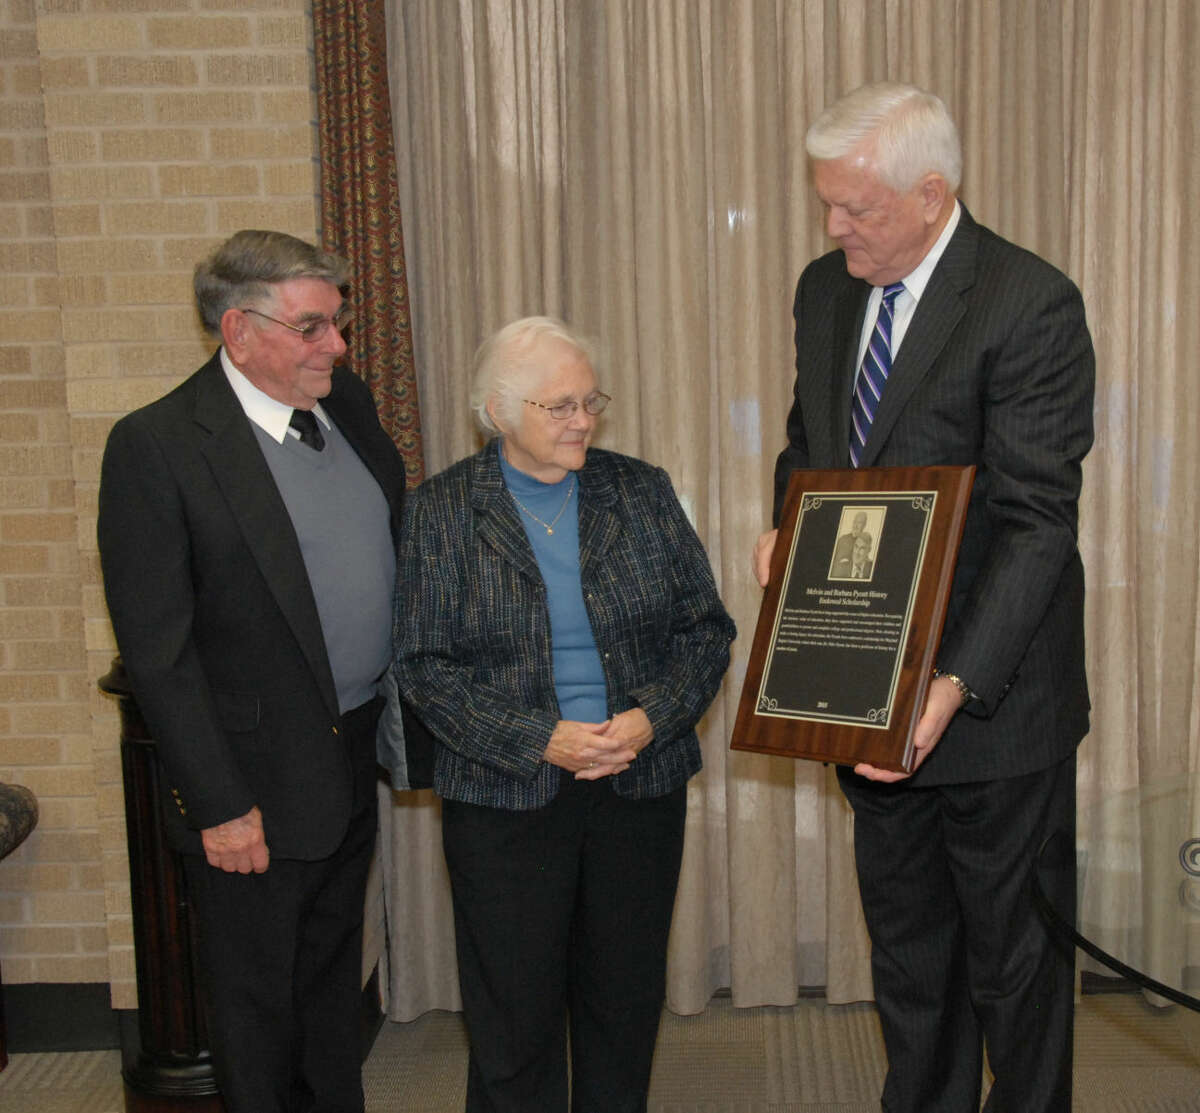 Wayland President Dr. Paul Armes (right) shows Melvin and Barbara Pyeatt, of Carlsbad, N.M., the scholarship plaque that will hang in McClung Center in honor of their newly endowed scholarship.